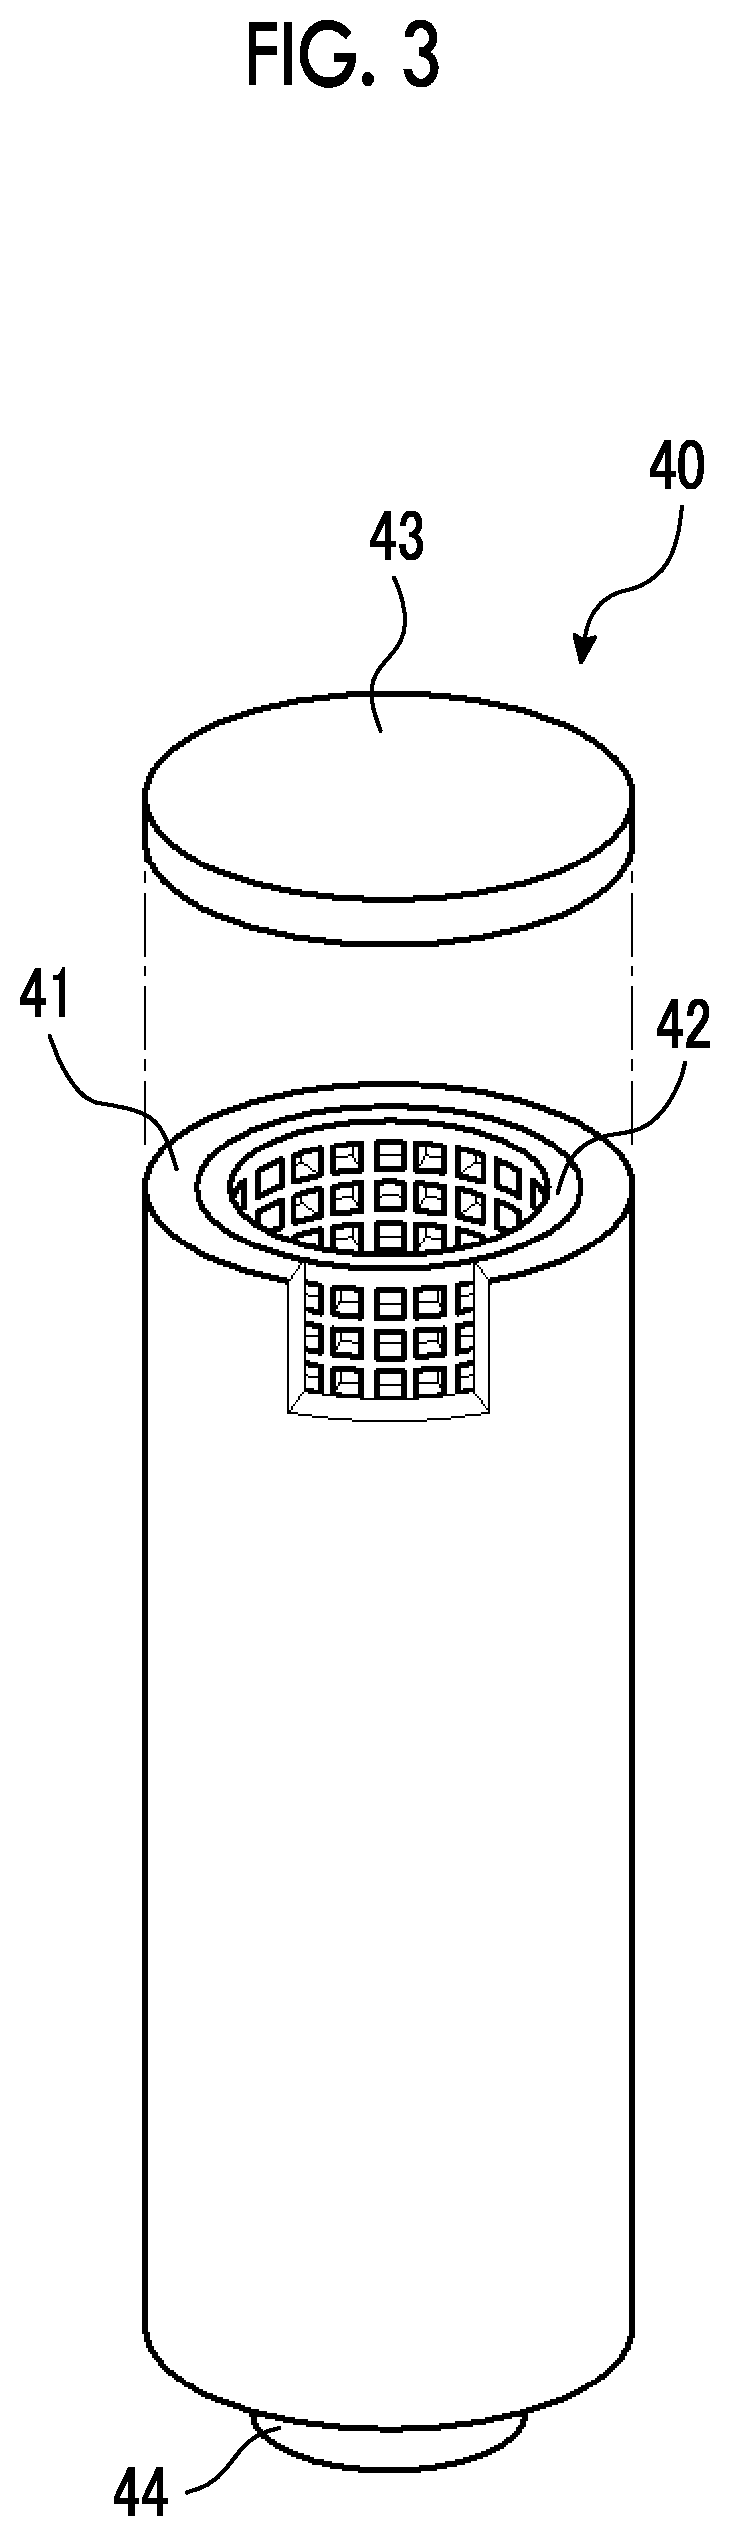 Member, container, chemical liquid storage body, reactor, distillation column, filter unit, storage tank, pipe line, and chemical liquid manufacturing method